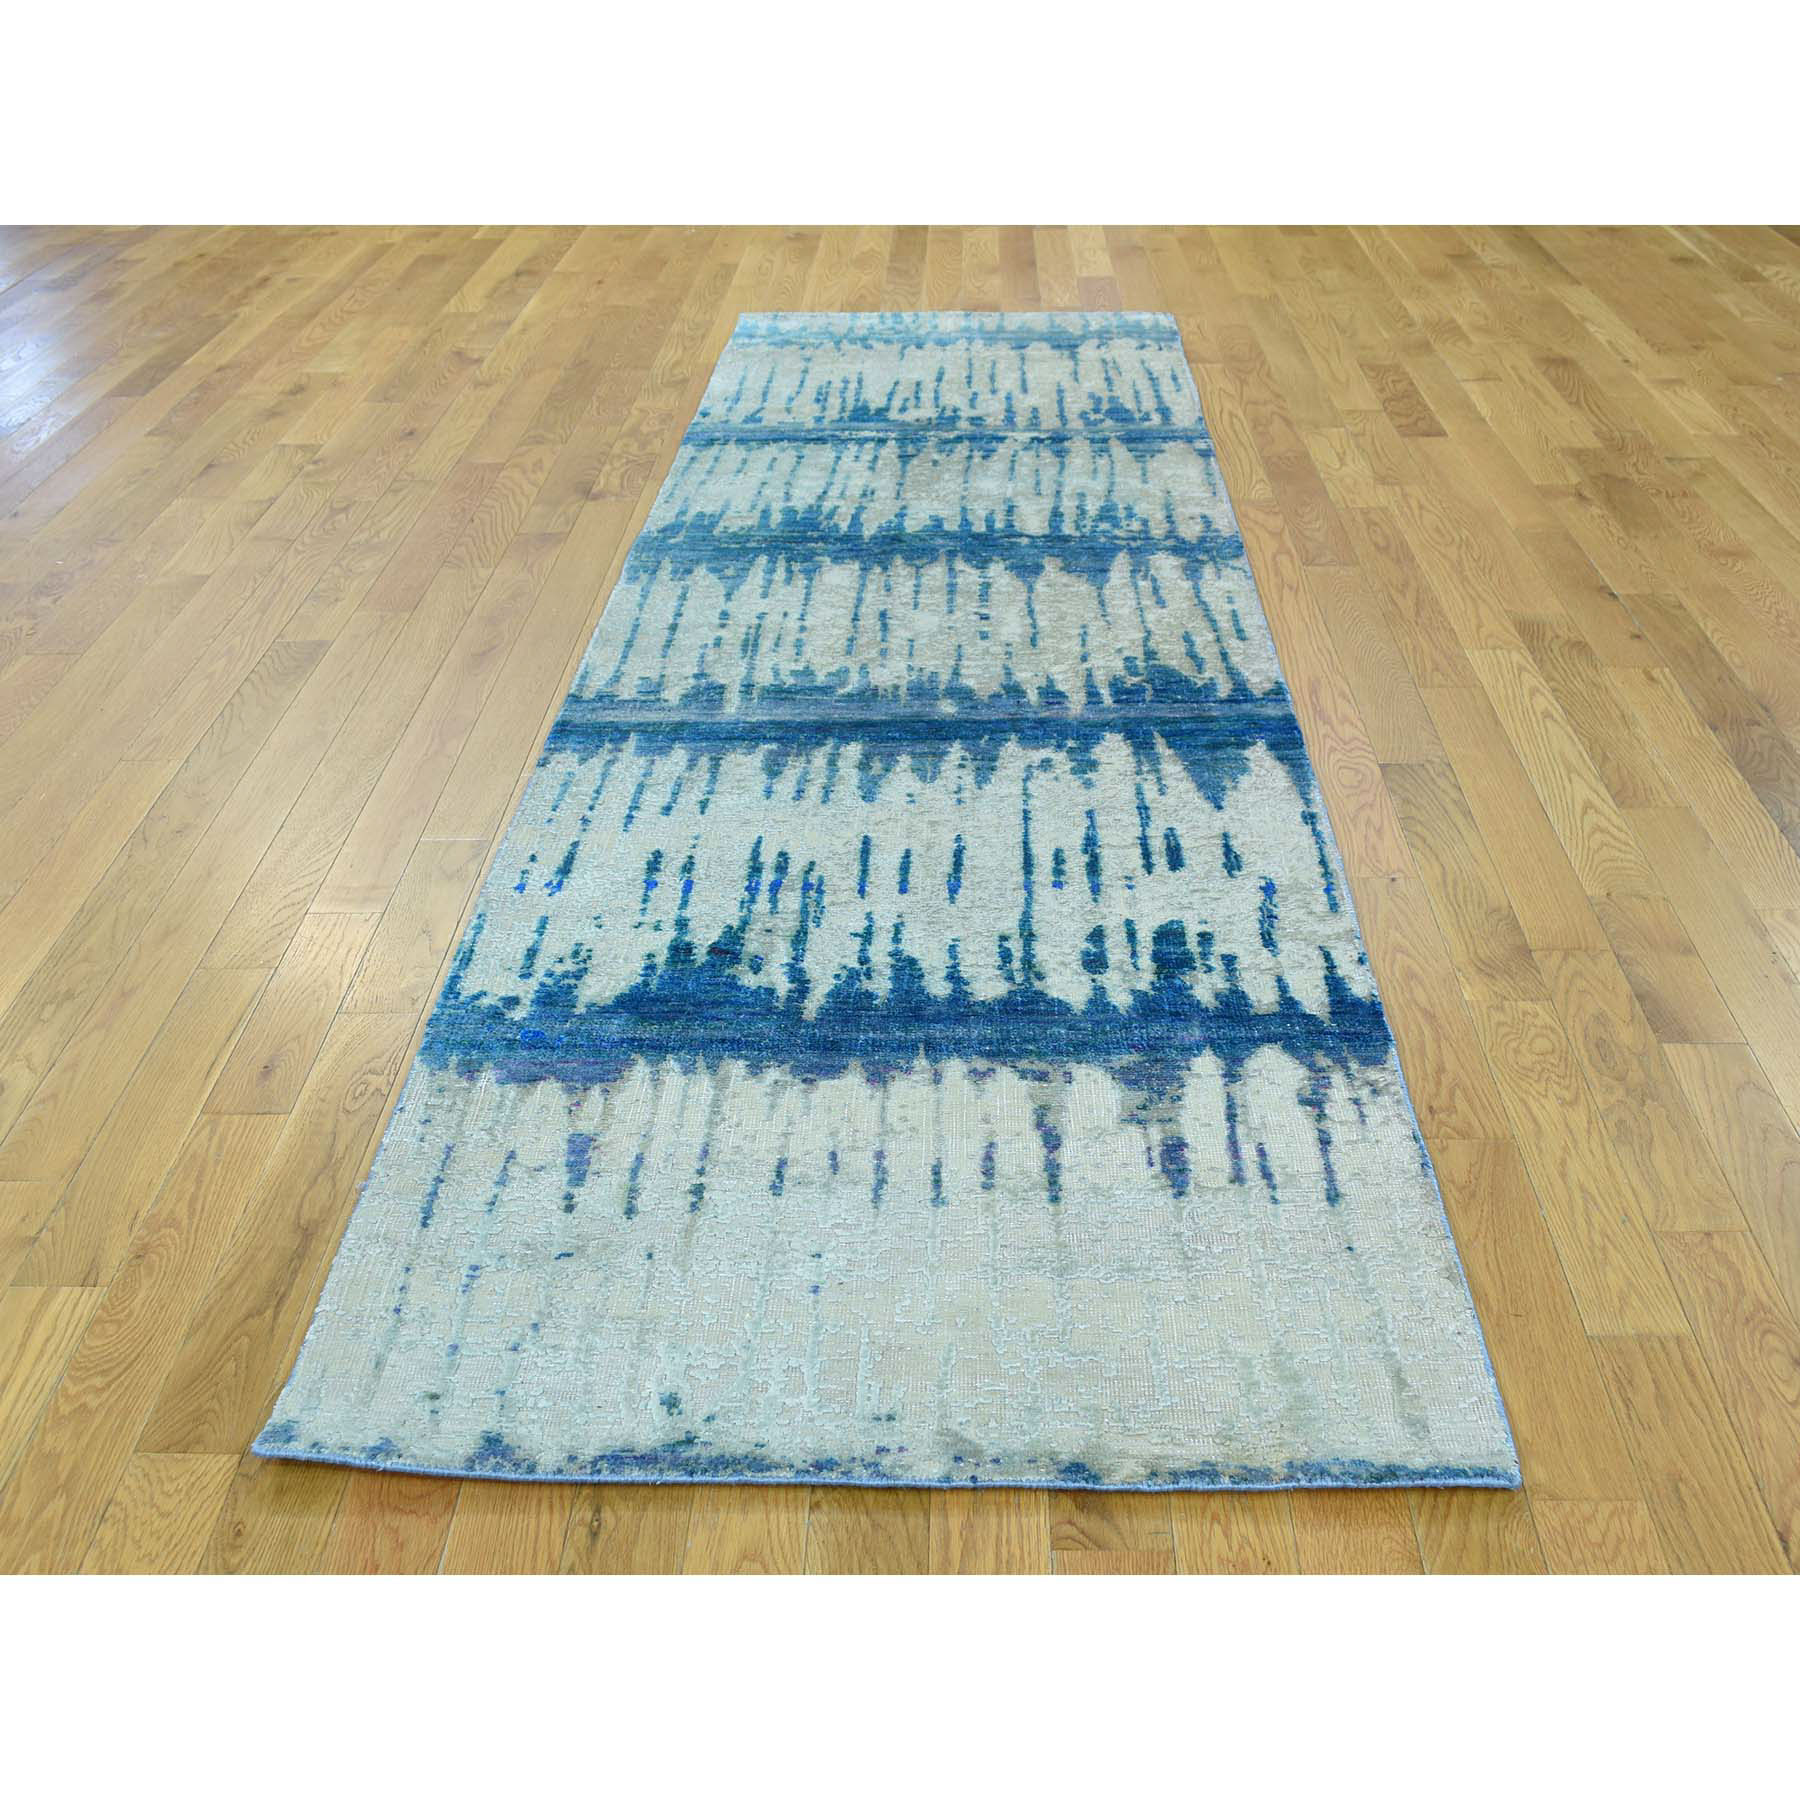 3-x10-1  THE CARDIAC Hand-Knotted Sari Silk with Textured Wool Runner Rug 